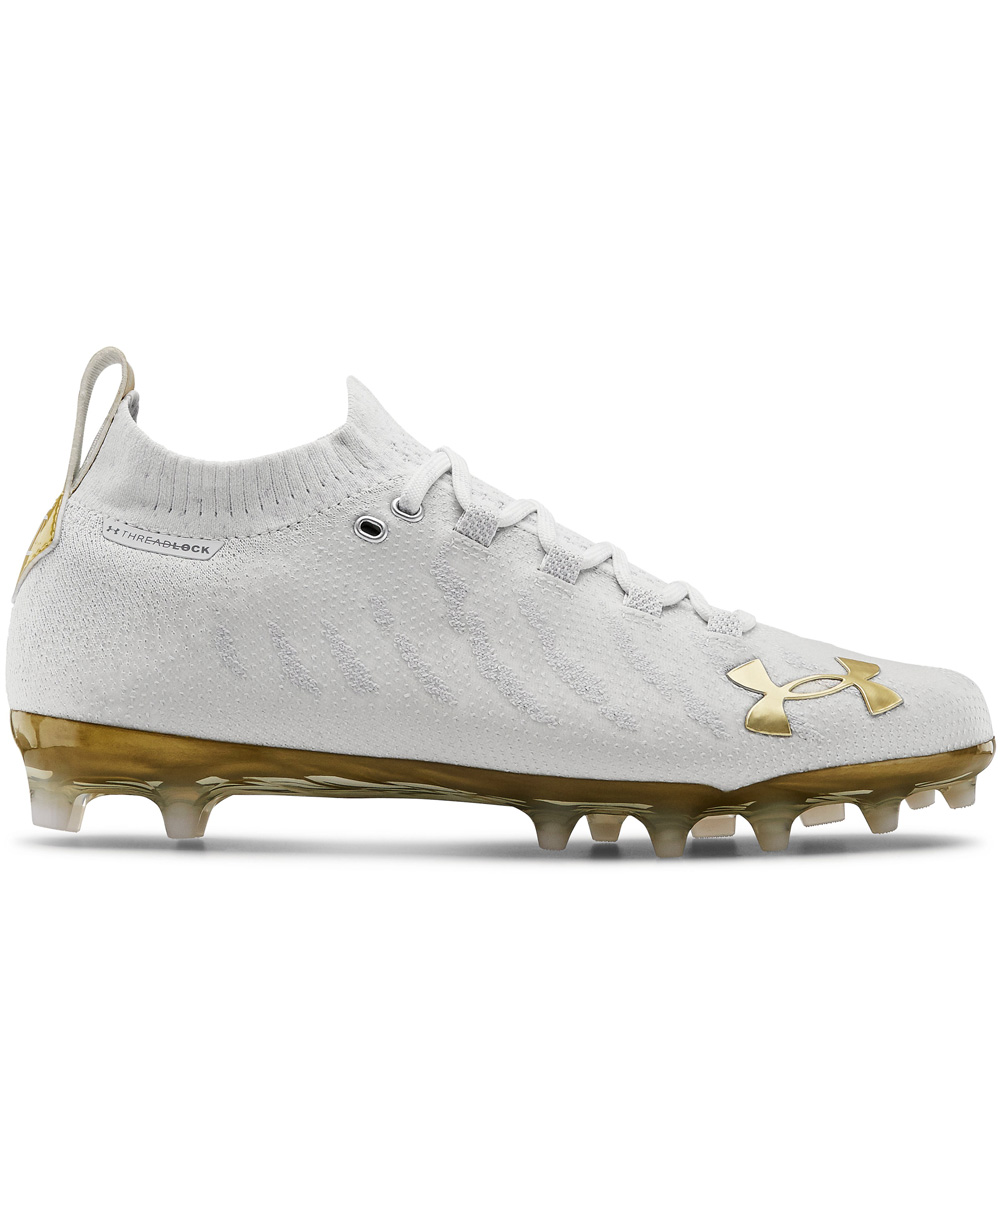 gold and white nike football cleats